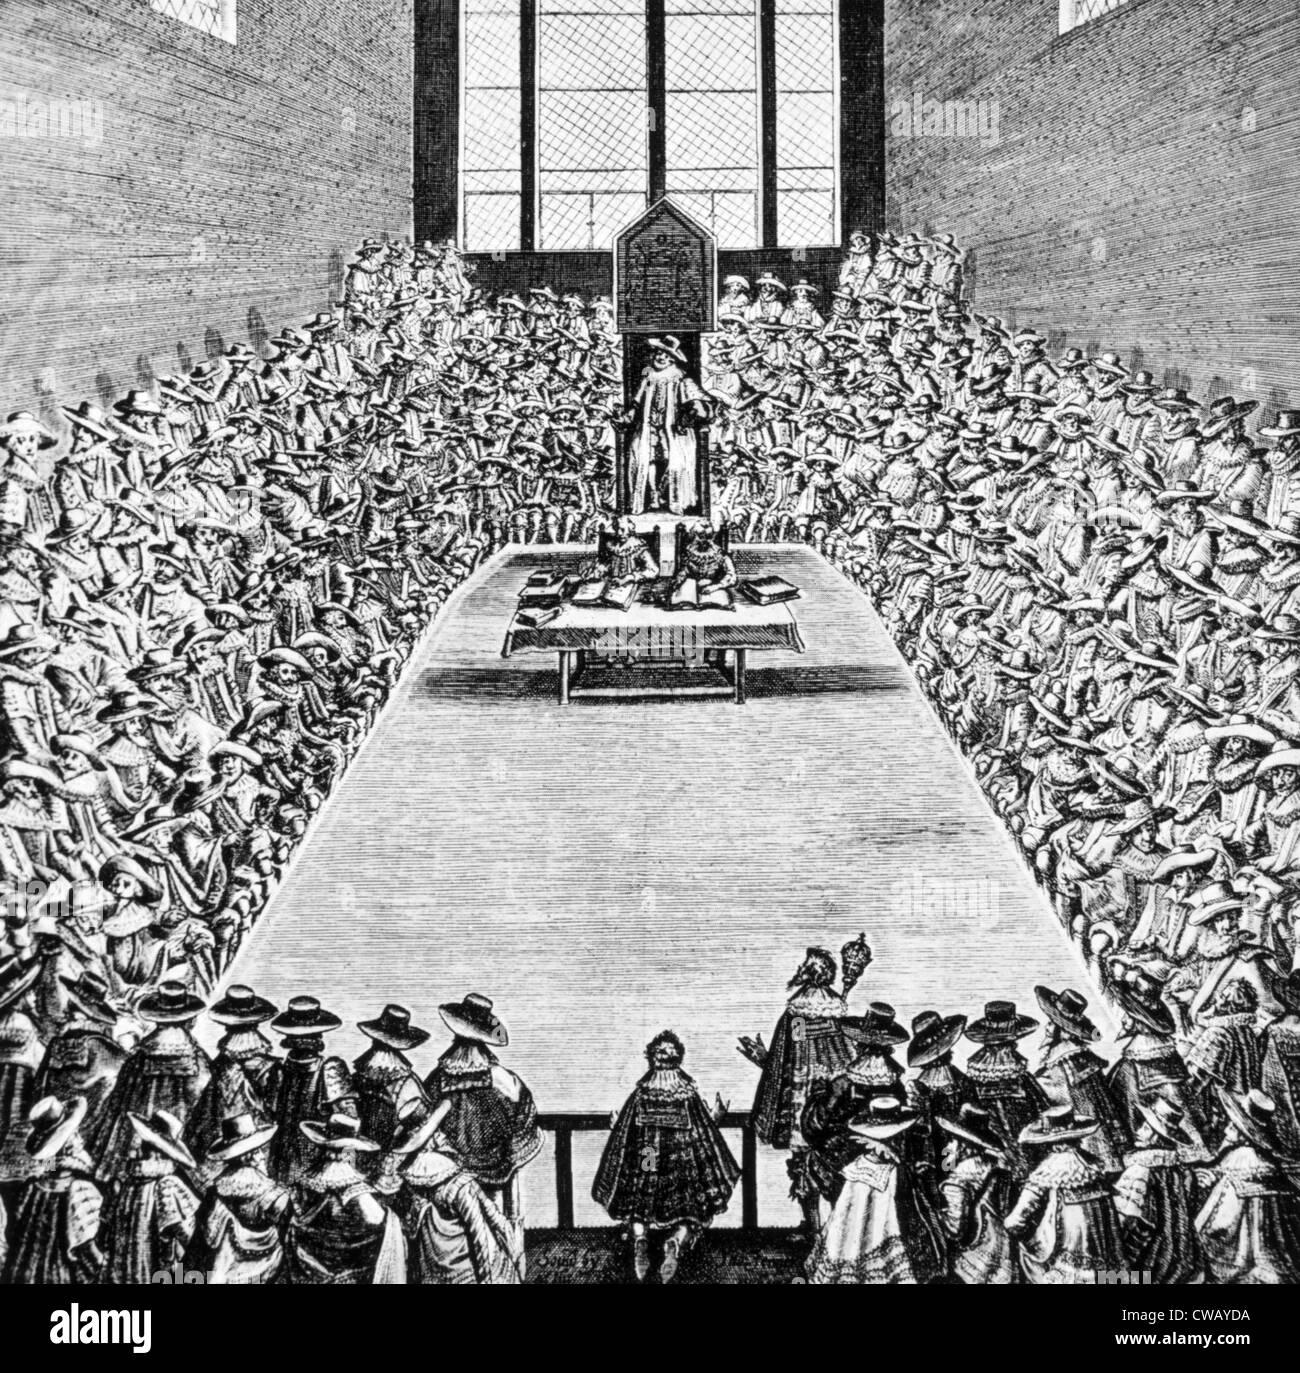 King James I (center, 1566-1625), Parliament in session in the reign of King James I (ruled England 1603-1625) Stock Photo